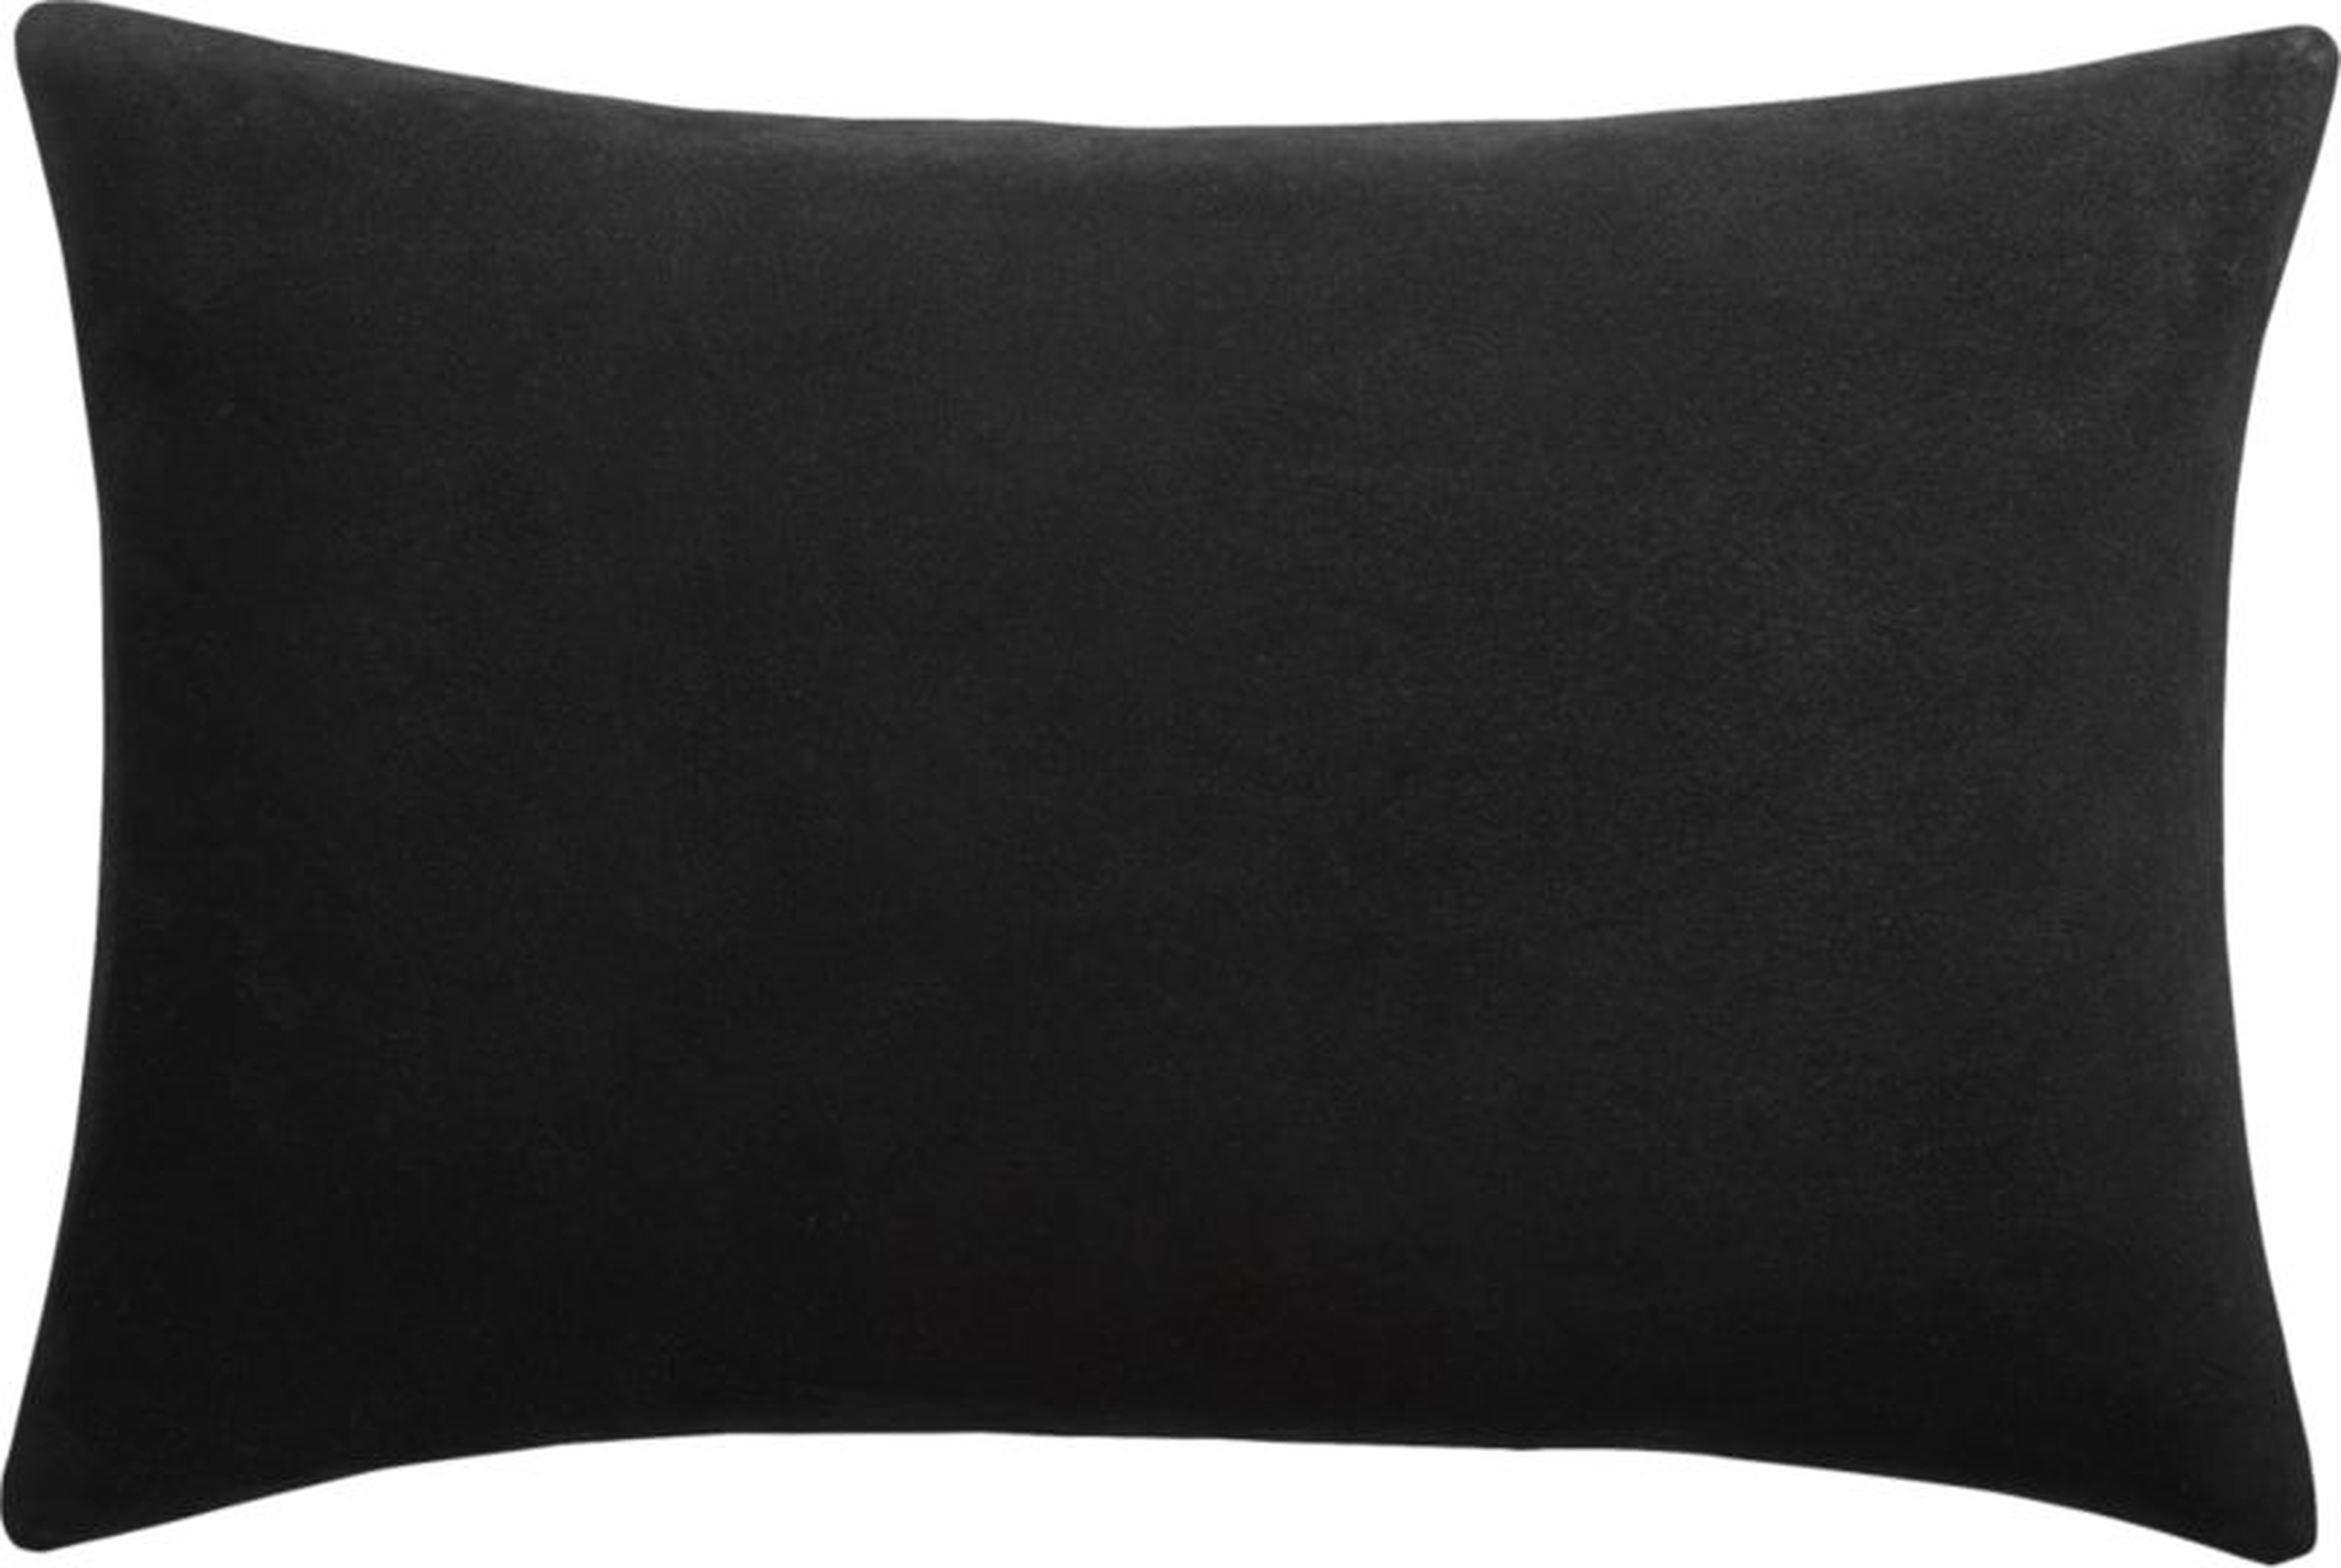 Loki Black Suede Pillow with Feather-Down Insert, 18" x 12" - CB2